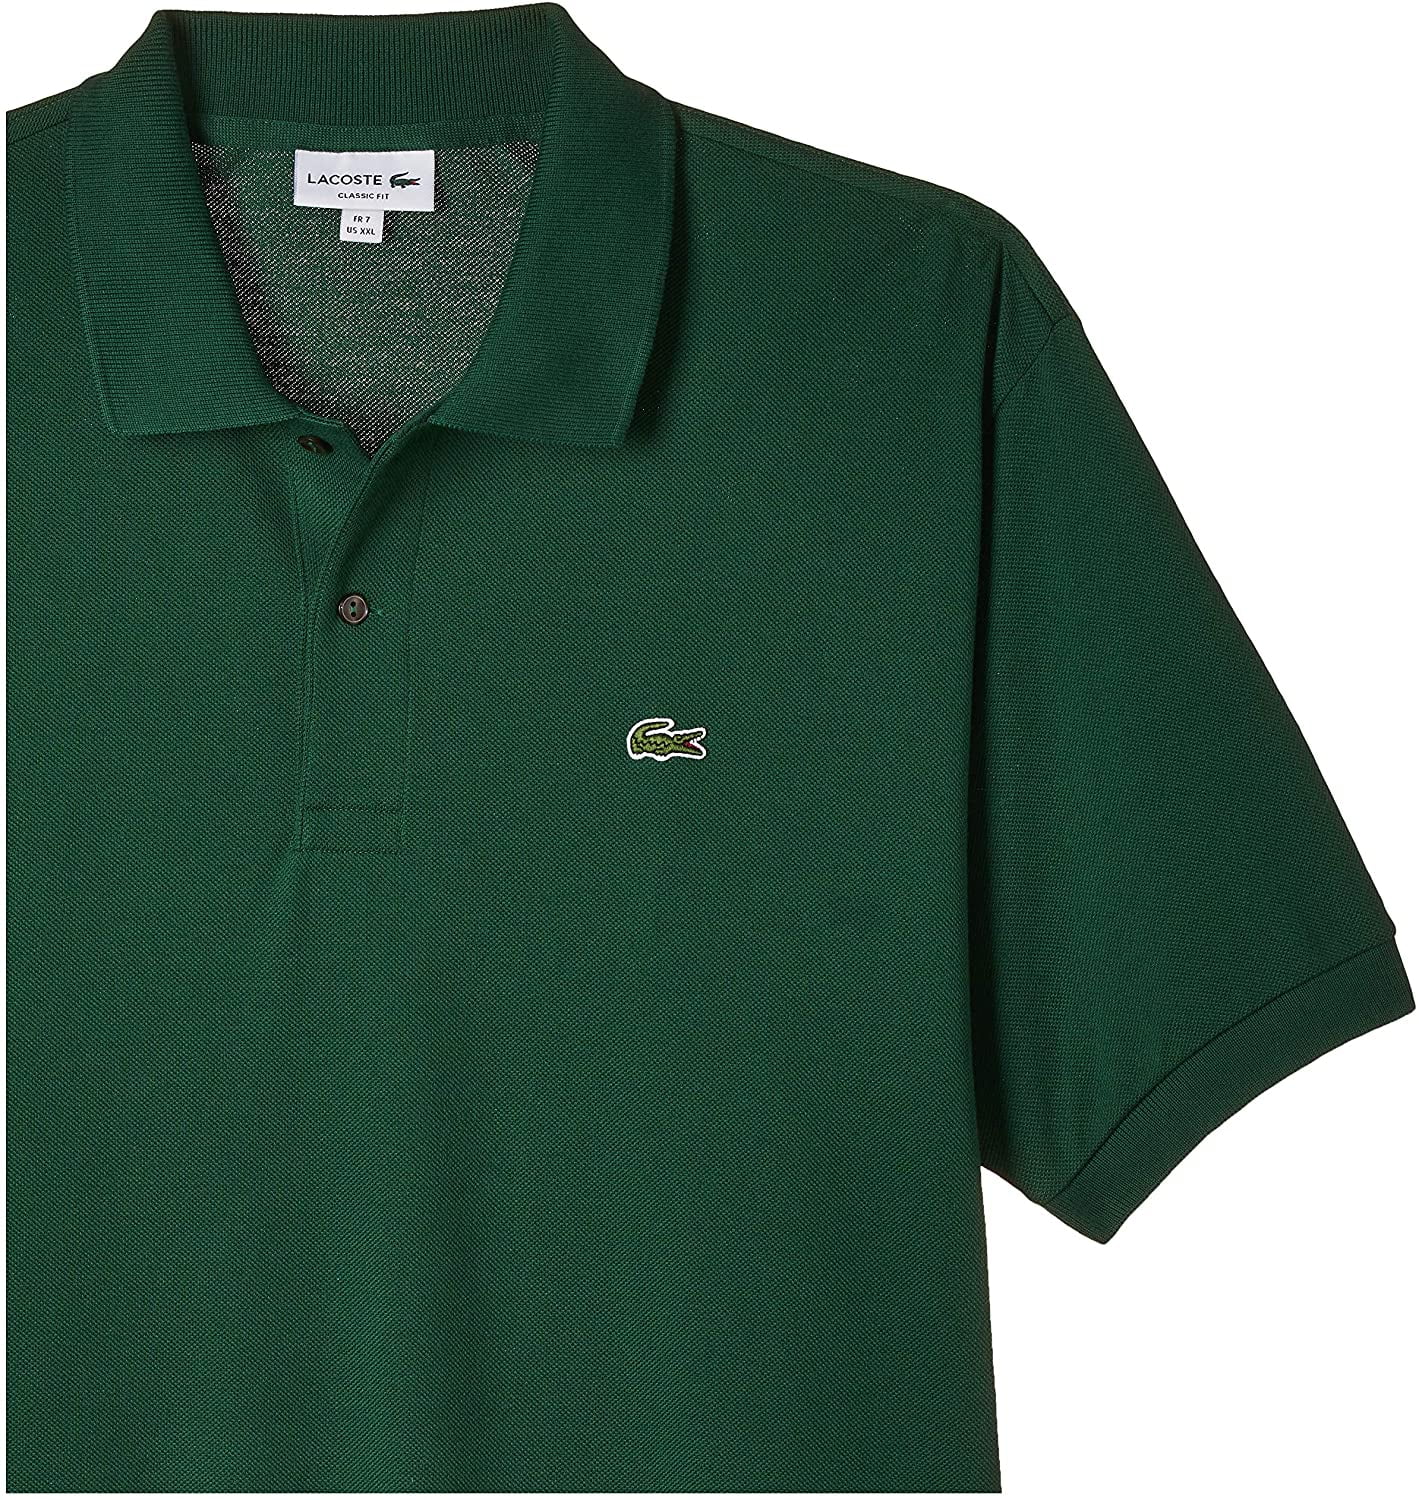 Lacoste Mens Short Sleeve Discontinued L.12.12 Pique Polo Shirt Large Green